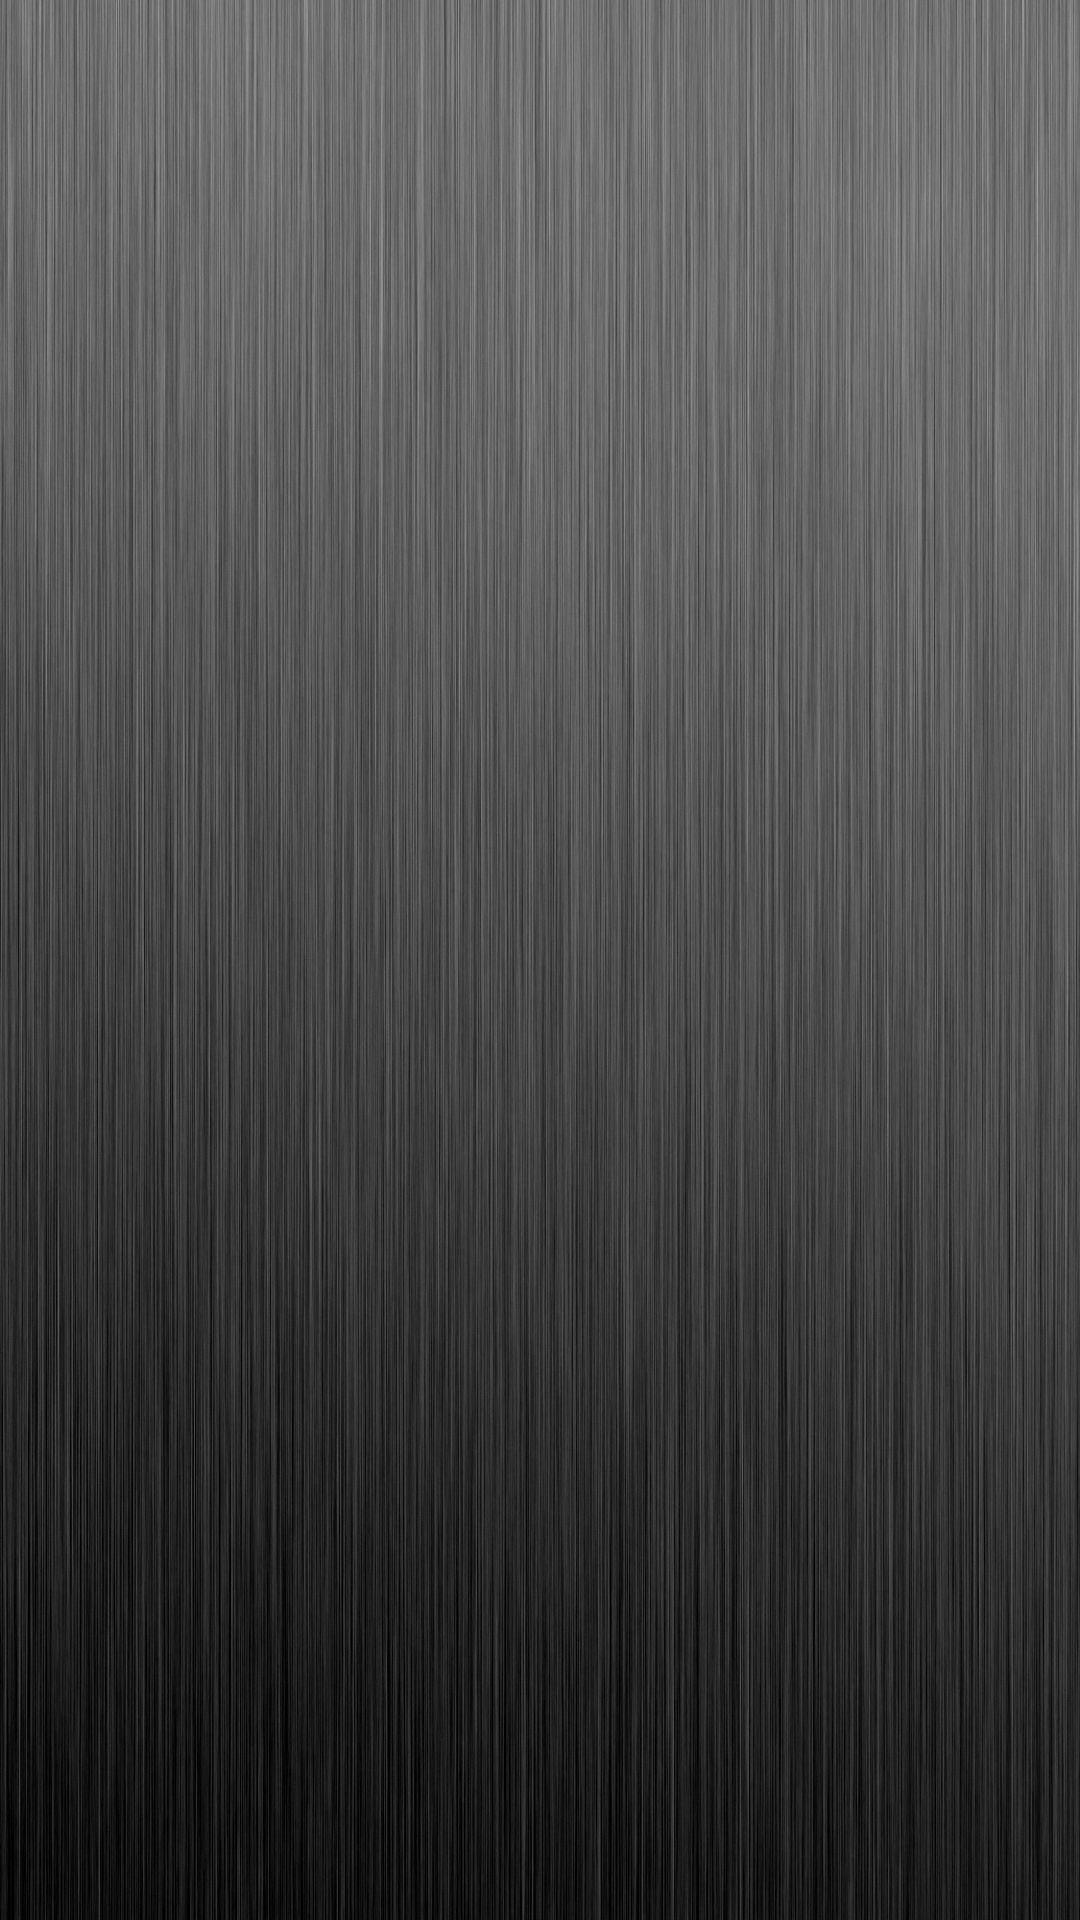 Dark metal texture htc one wallpaper, free and easy to download